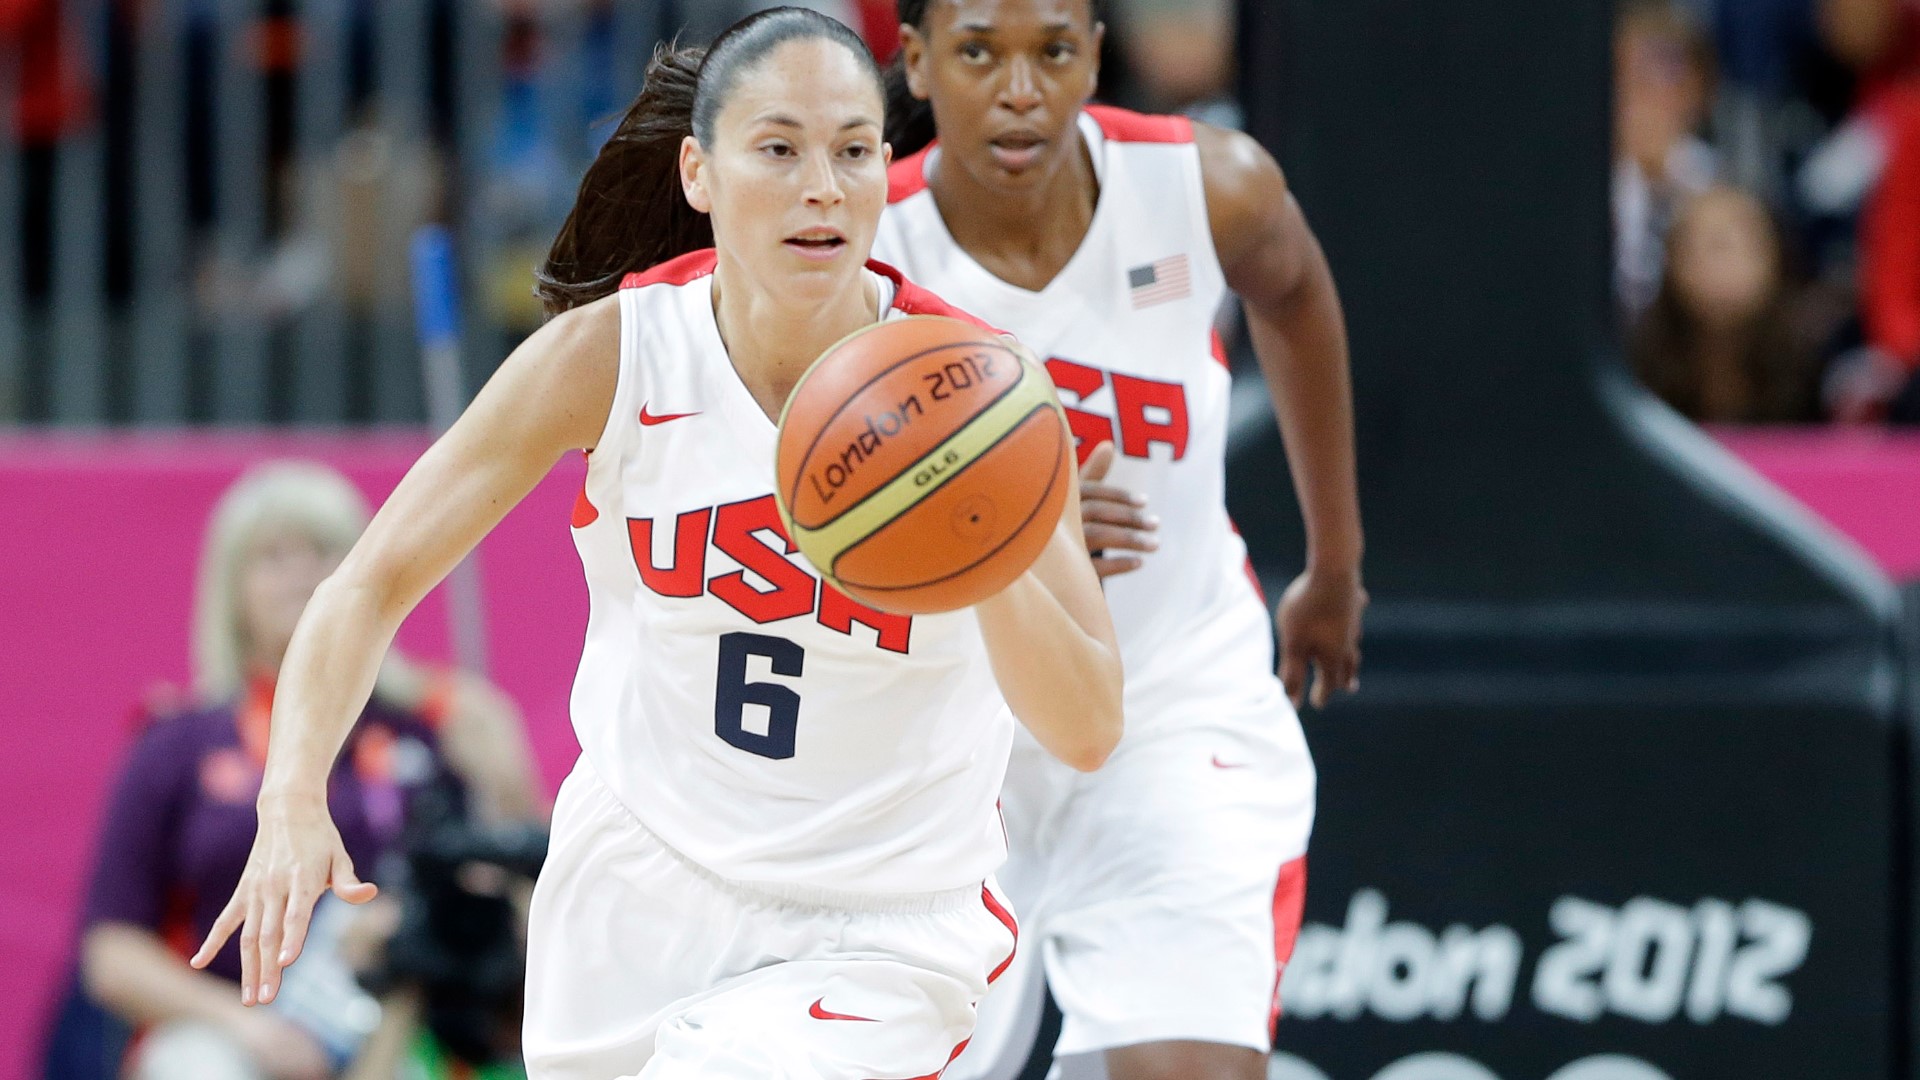 Bird is one of the most decorated American basketball players ever, but she thinks she might have one more gold medal in her future